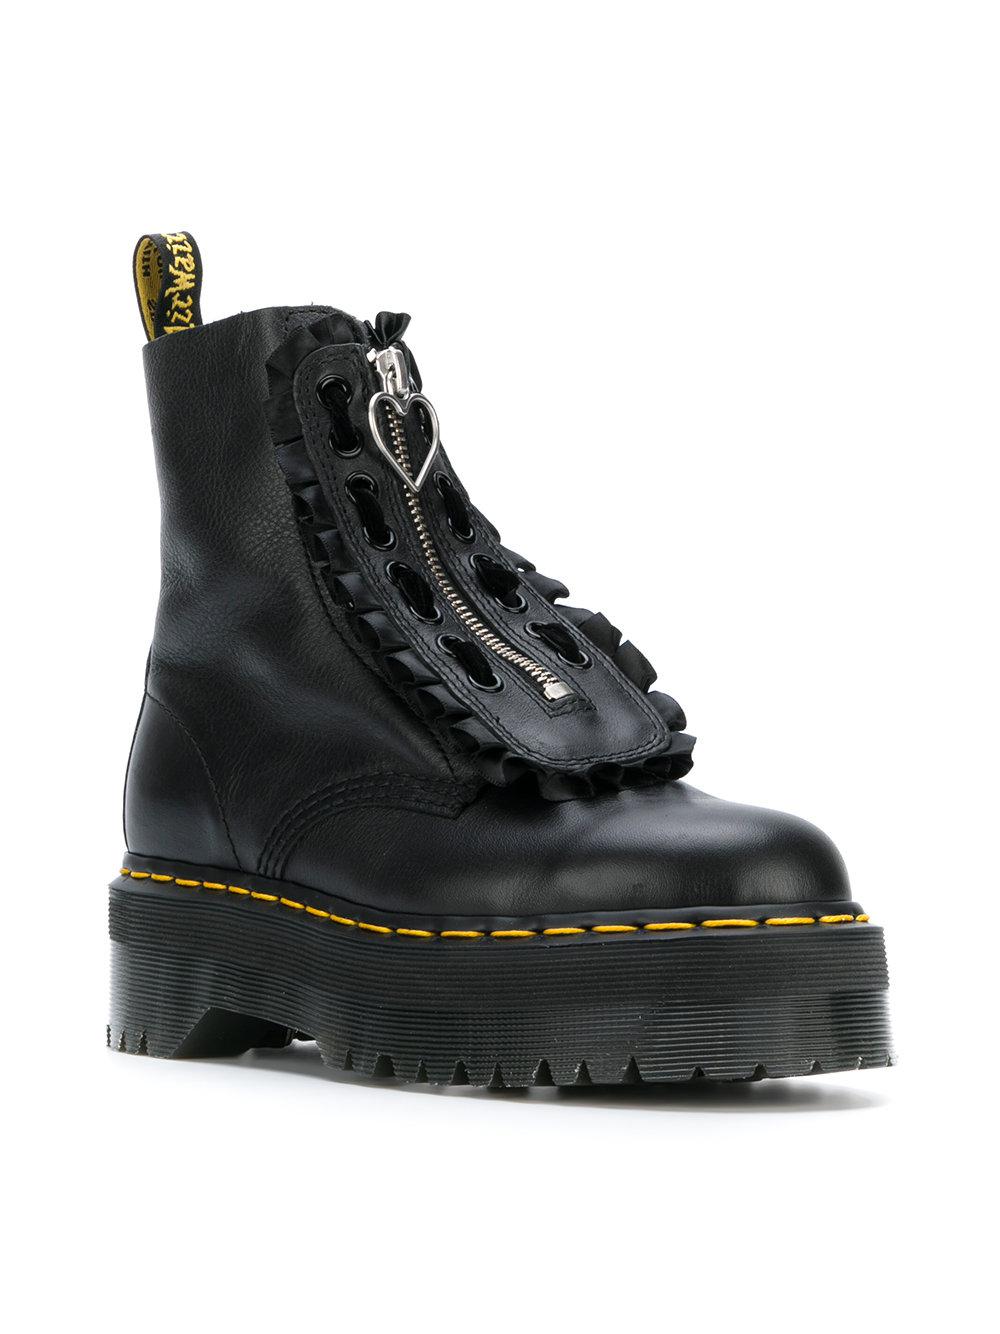 Dr. Martens Leather Lazy Oaf Jungle Boots in Black - Lyst